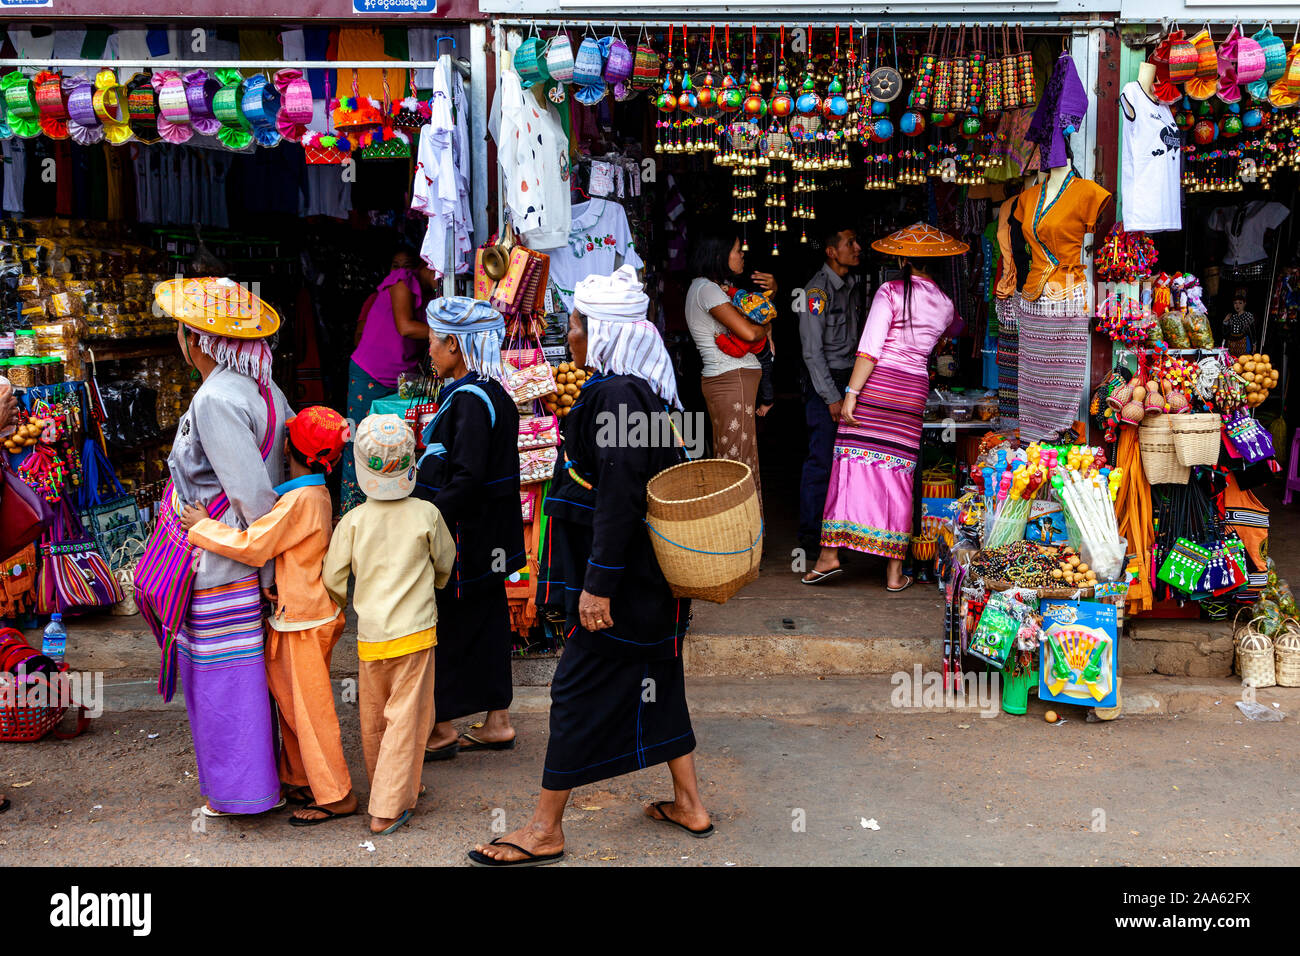 A Group Of Ethnic Minority People Looking At The Shops, Pindaya, Shan State, Myanmar. Stock Photo